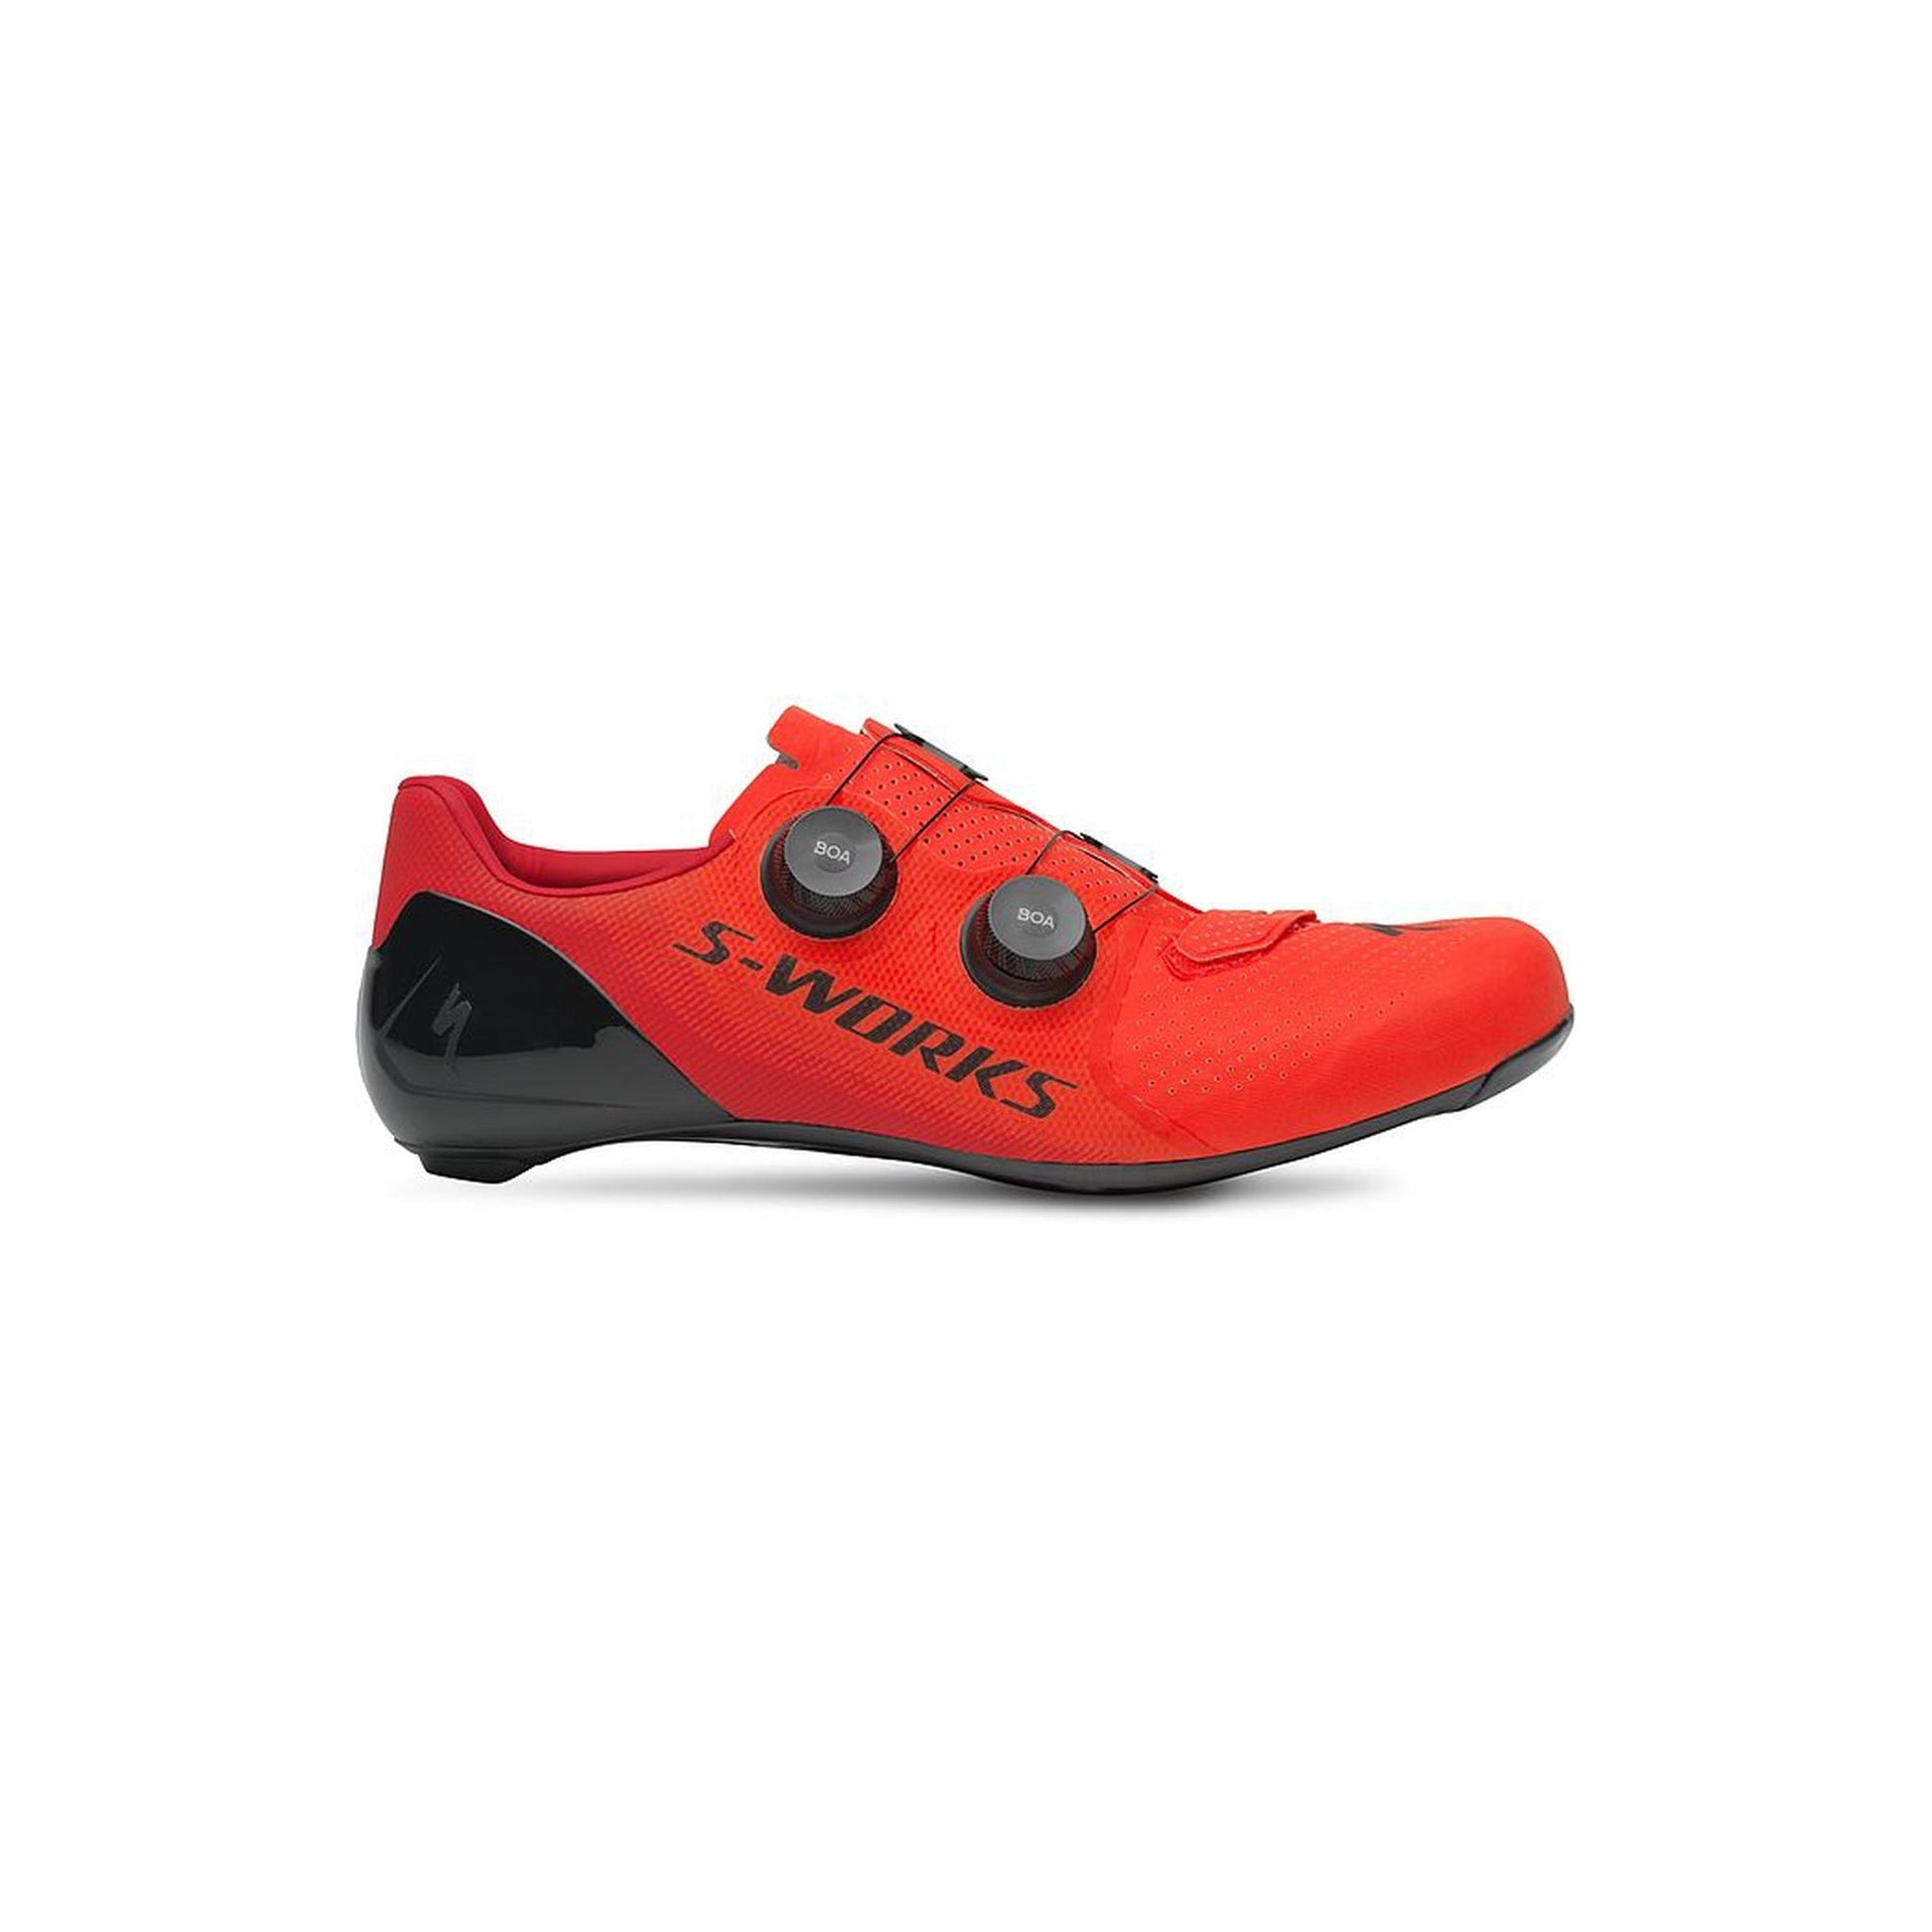 S-Works 7 Road Shoes-Cycles Direct Specialized